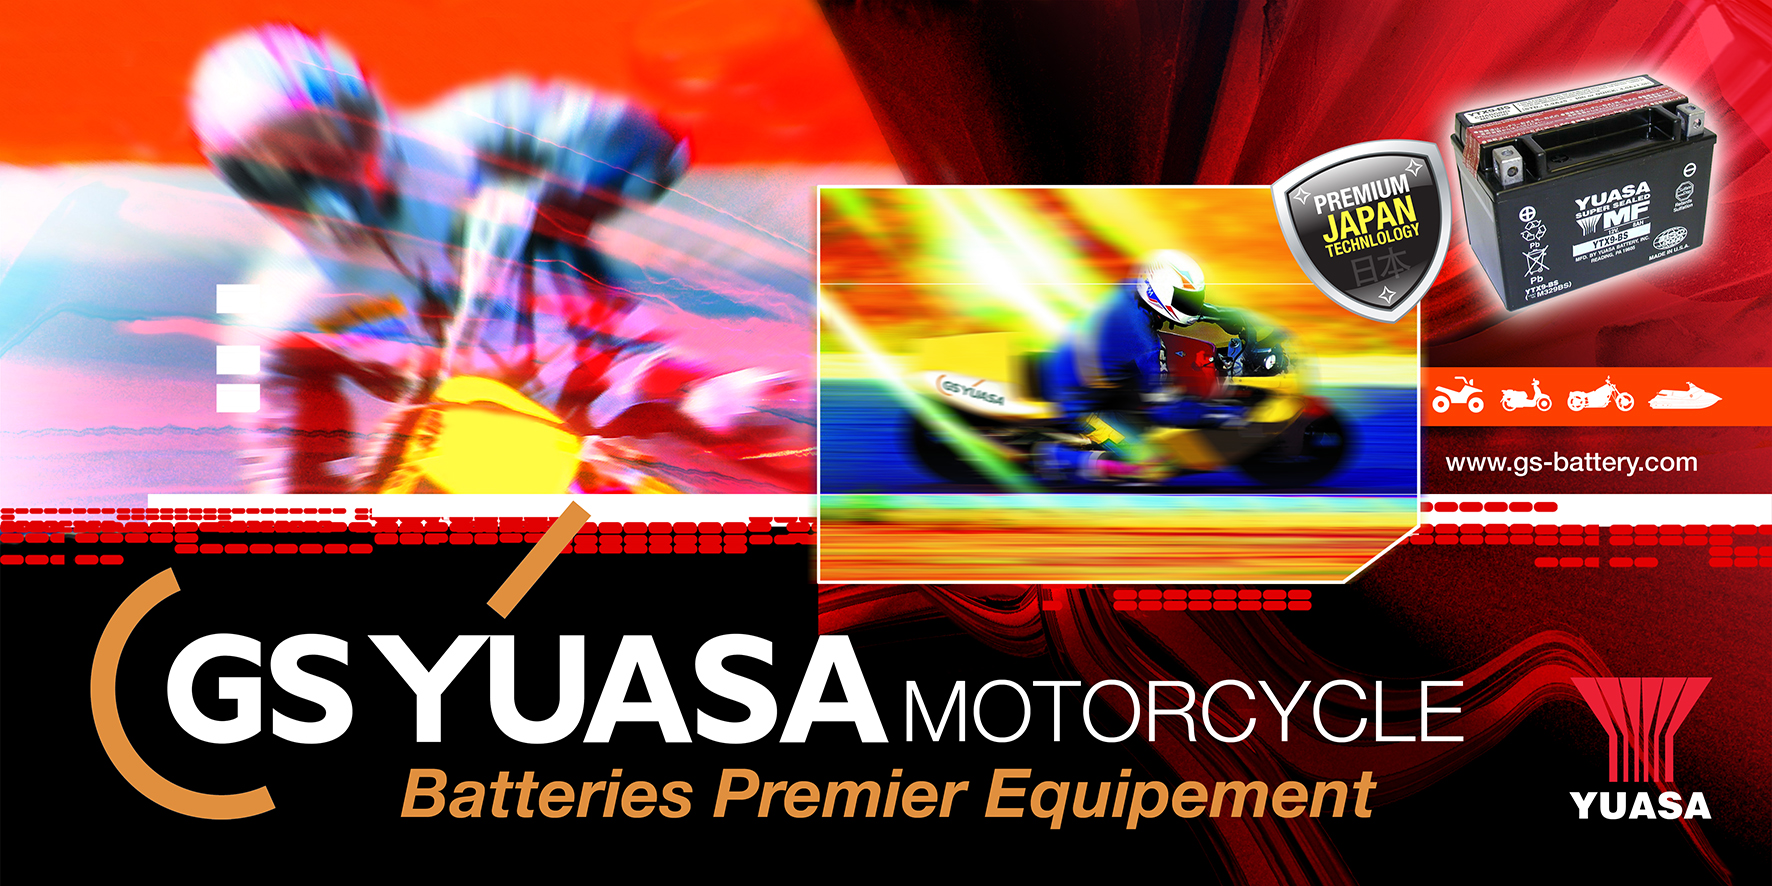 You are currently viewing YUASA – Visuel promotion Moto